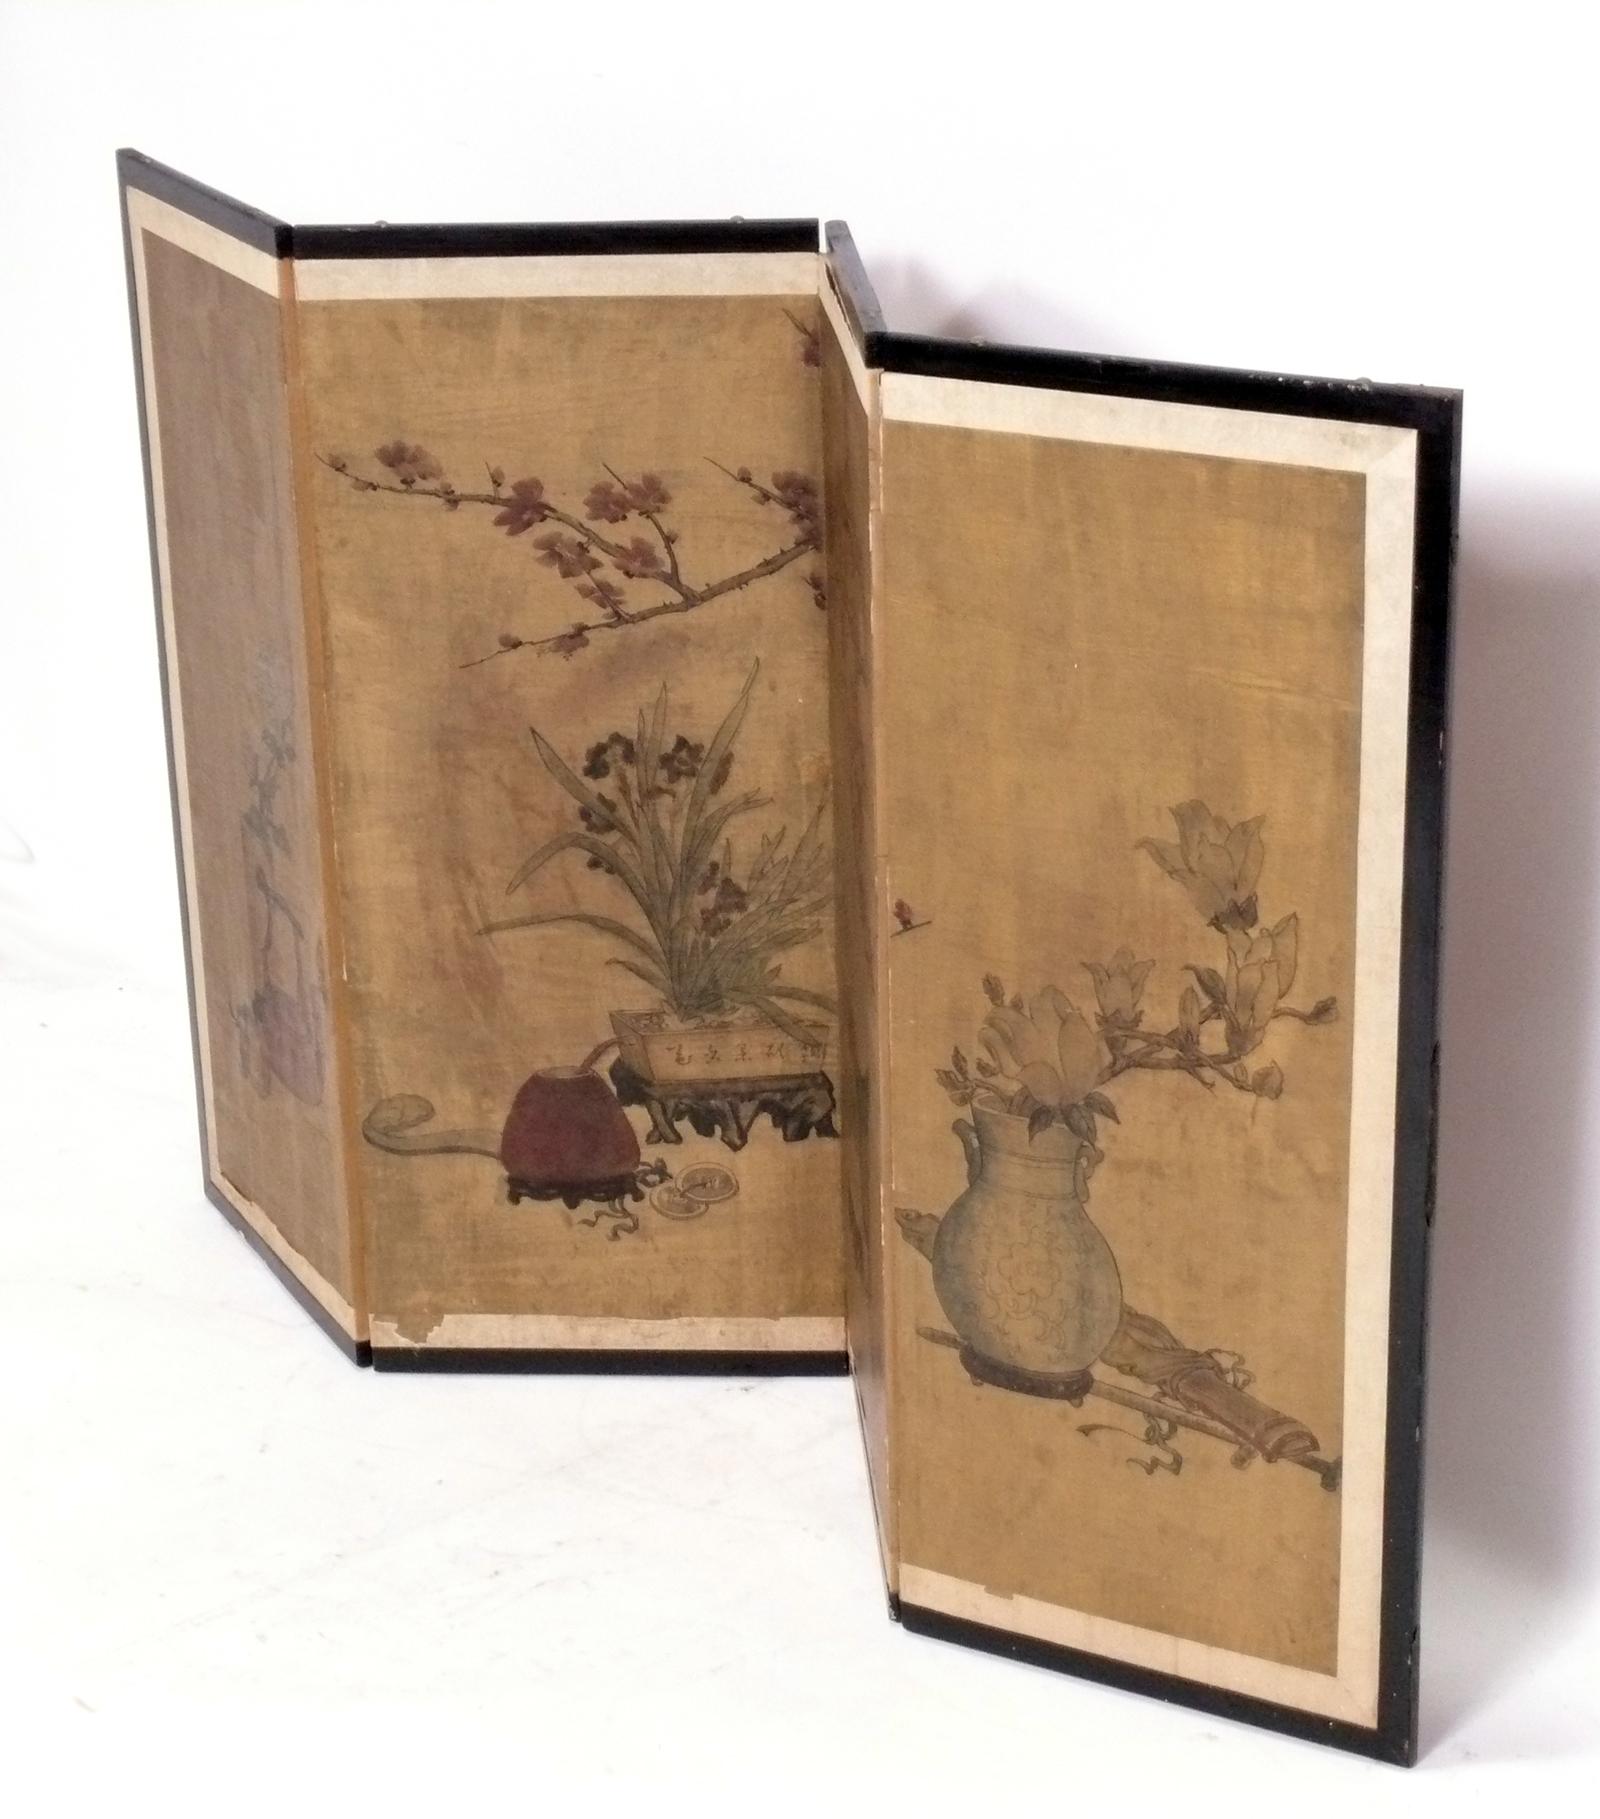 Hand painted Chinese screen, China, circa 1950s. This screen features a hand-painted still life and could be used as a table screen, or wall-mounted as a painting or wall decoration.